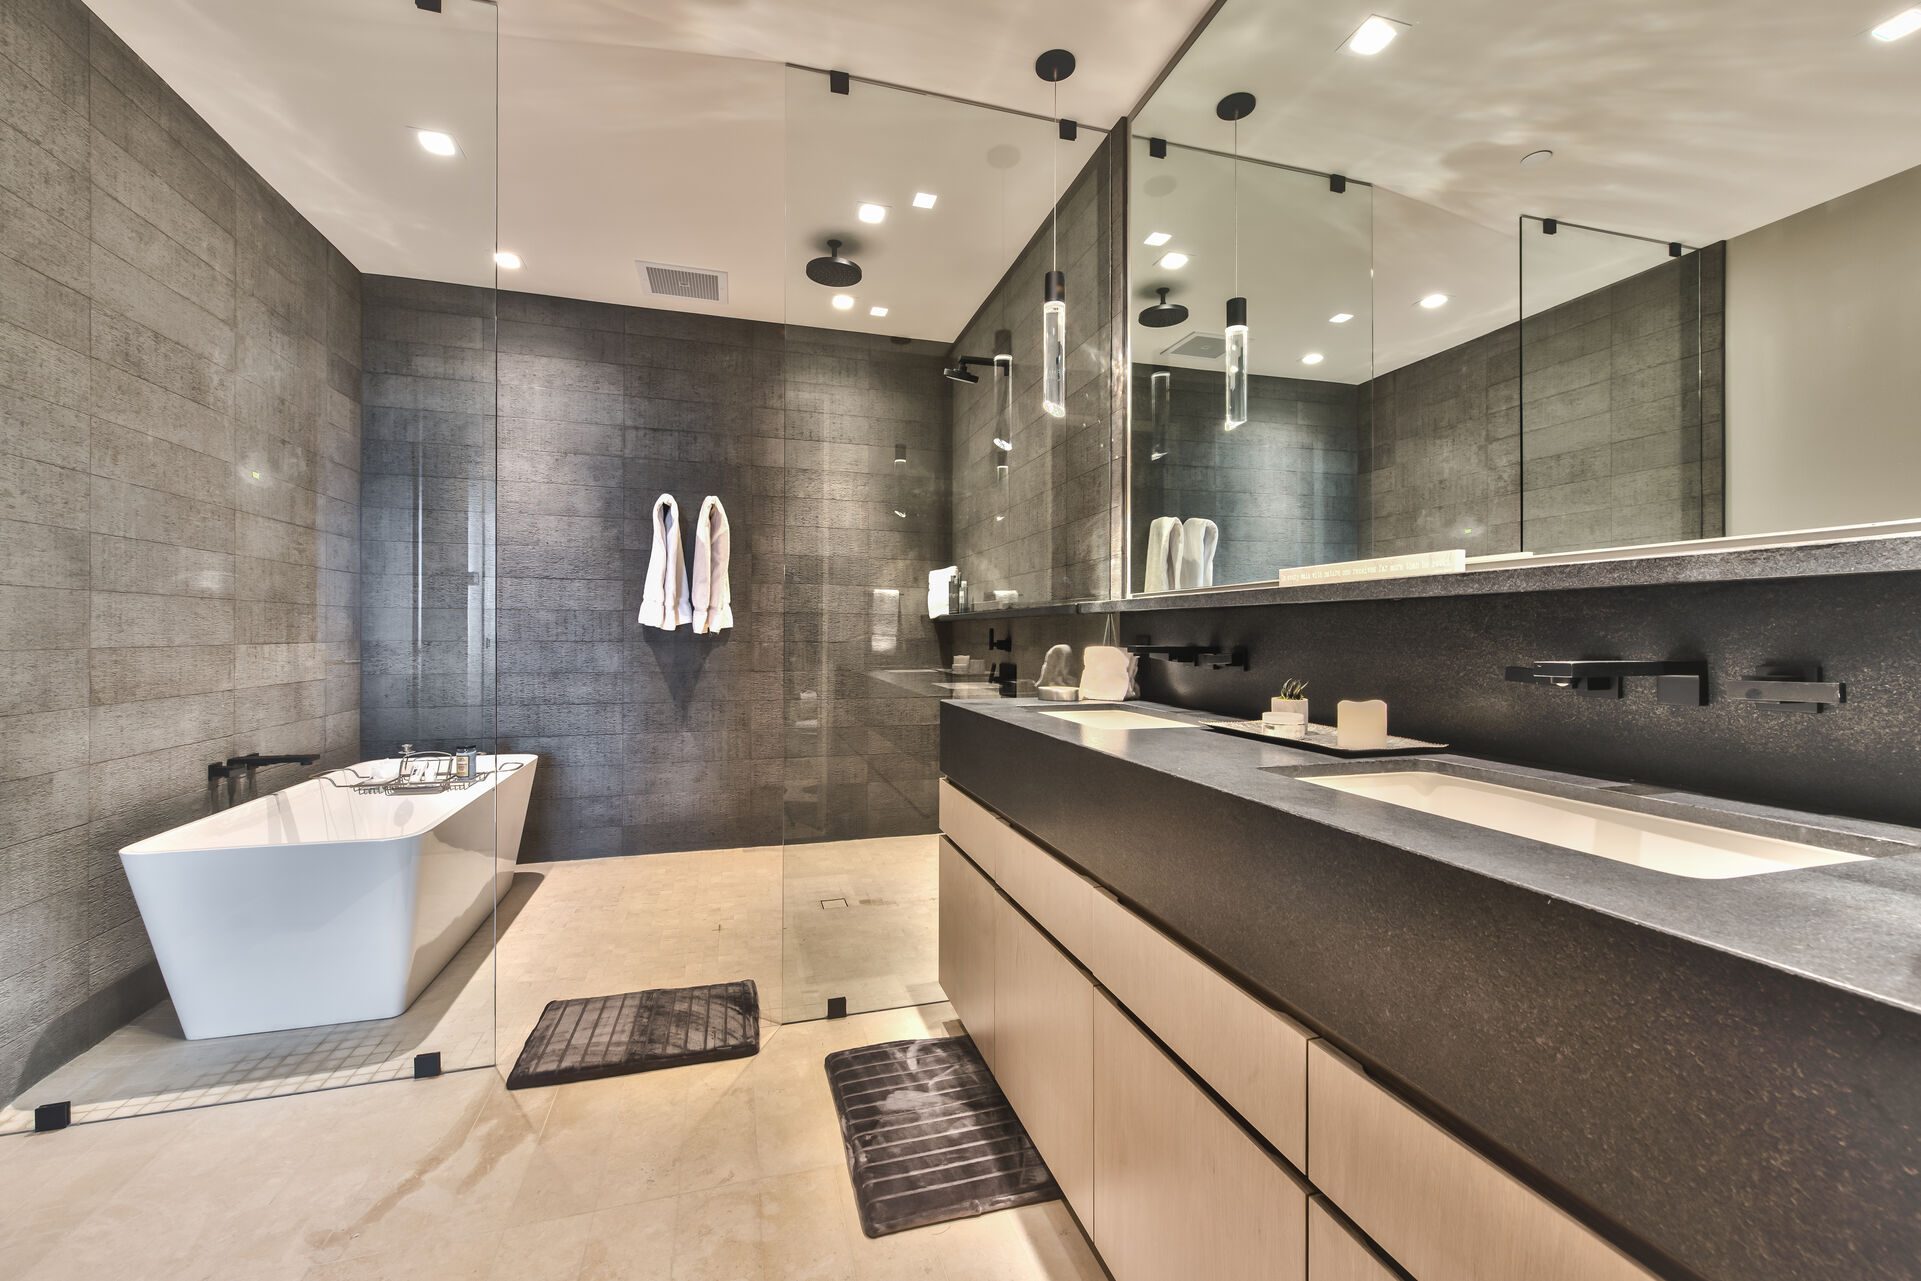 Grand Master Bathroom with Dual Sinks, Oversize Shower with Dual Shower Heads and Soaking Tub with Radiant Heated Floors